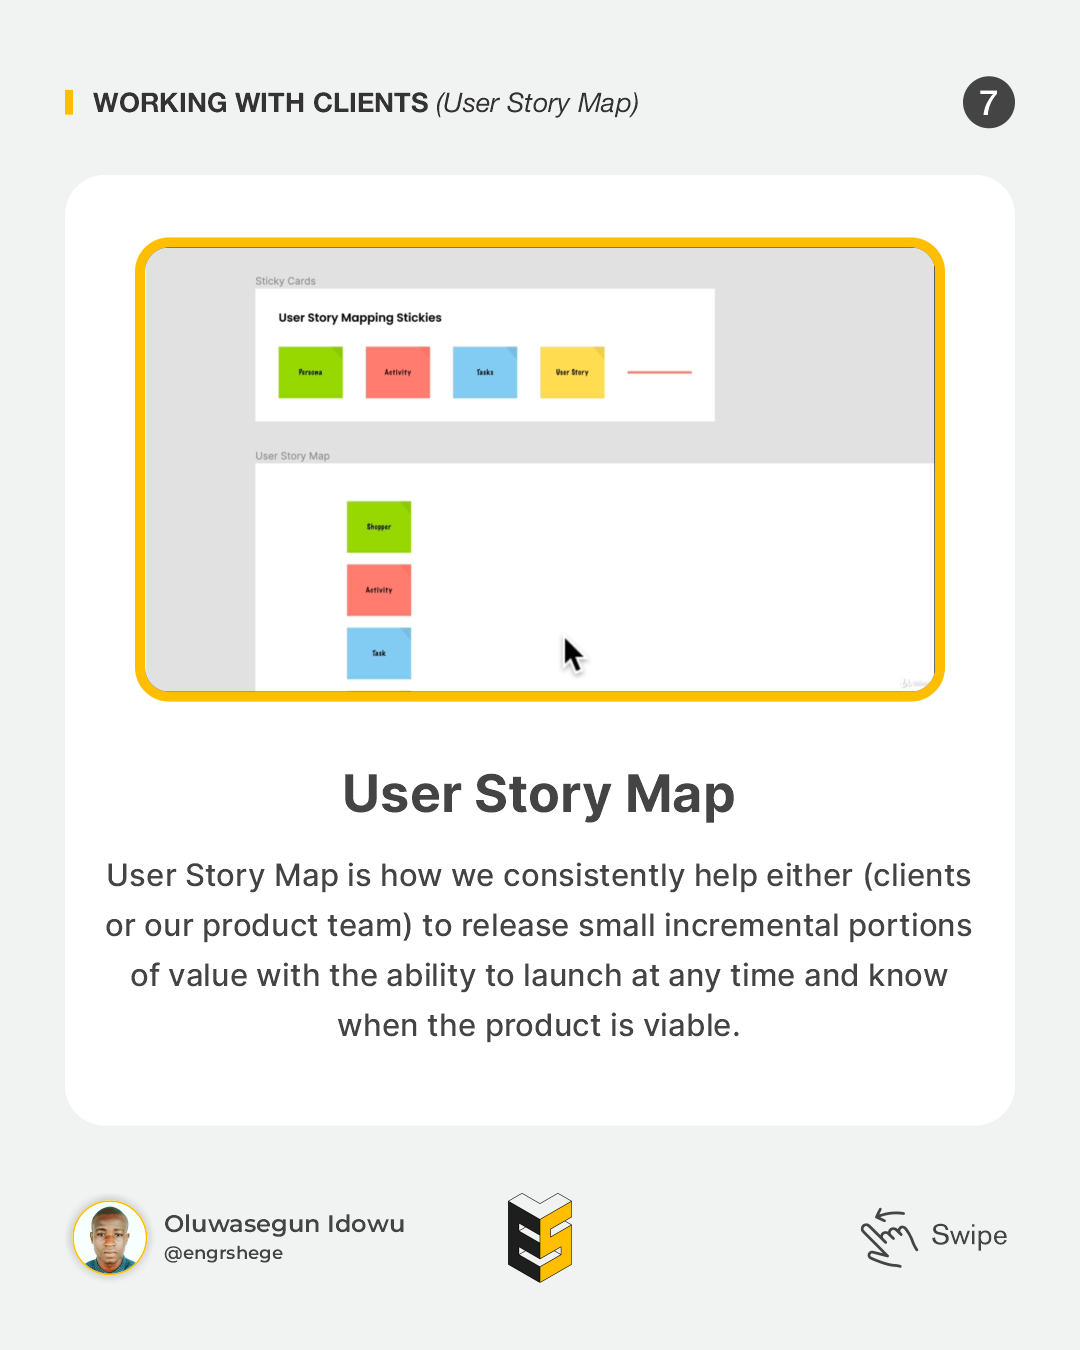 7. User Story Map